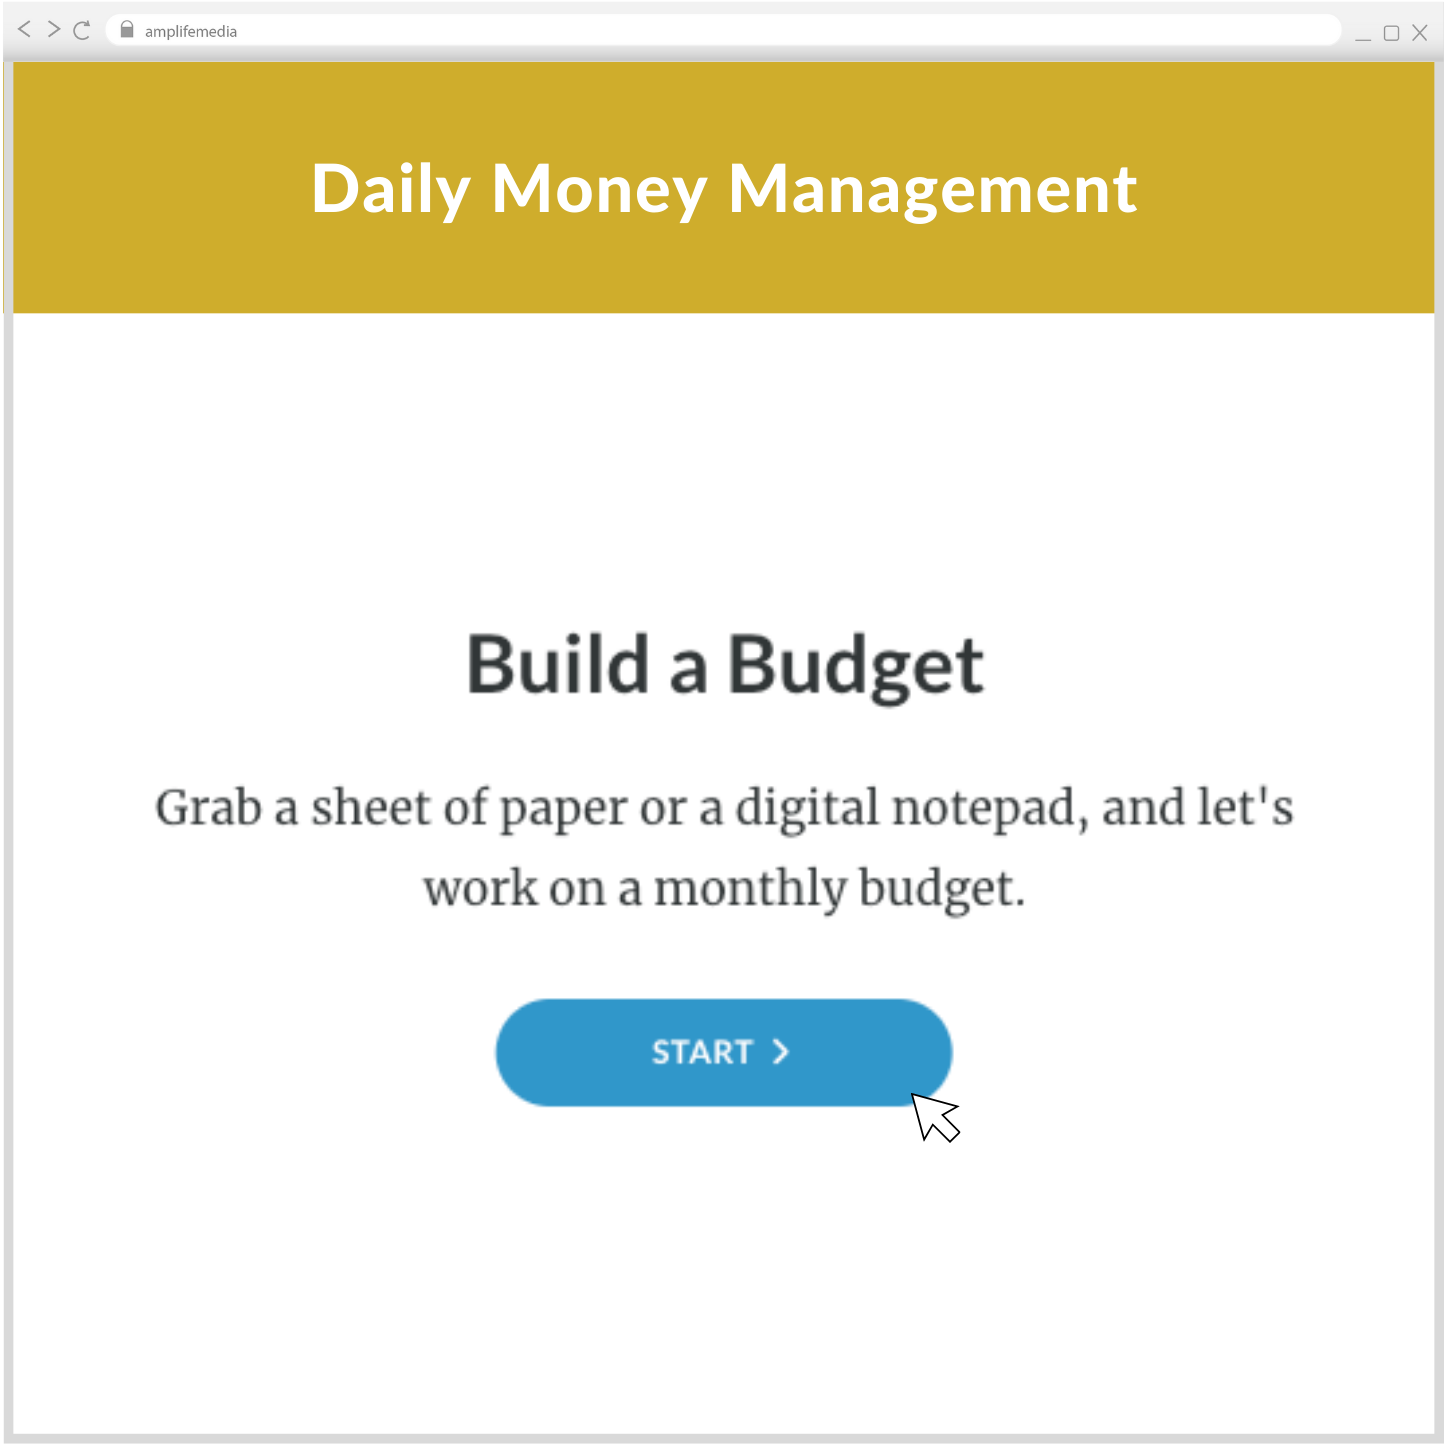 Subscription to Wellbeing Media: Daily Money Management MT 1121